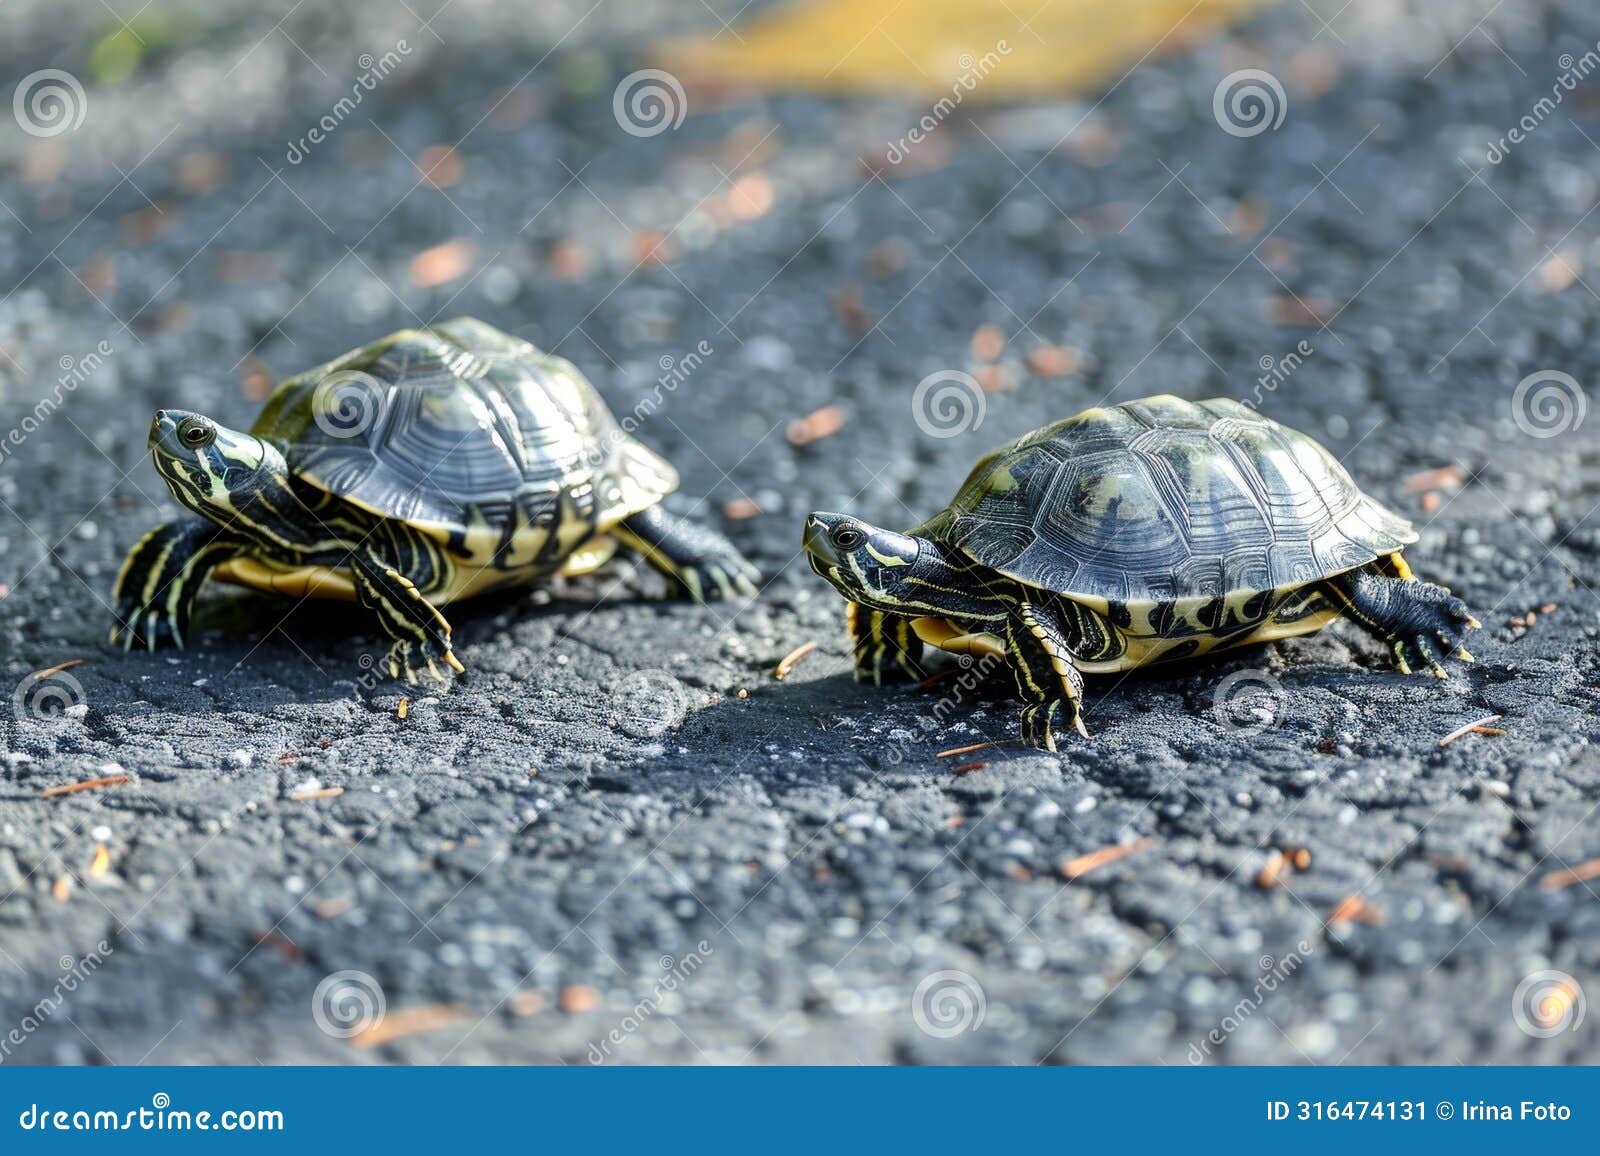 two turtles on asphalt attentive to surroundings.